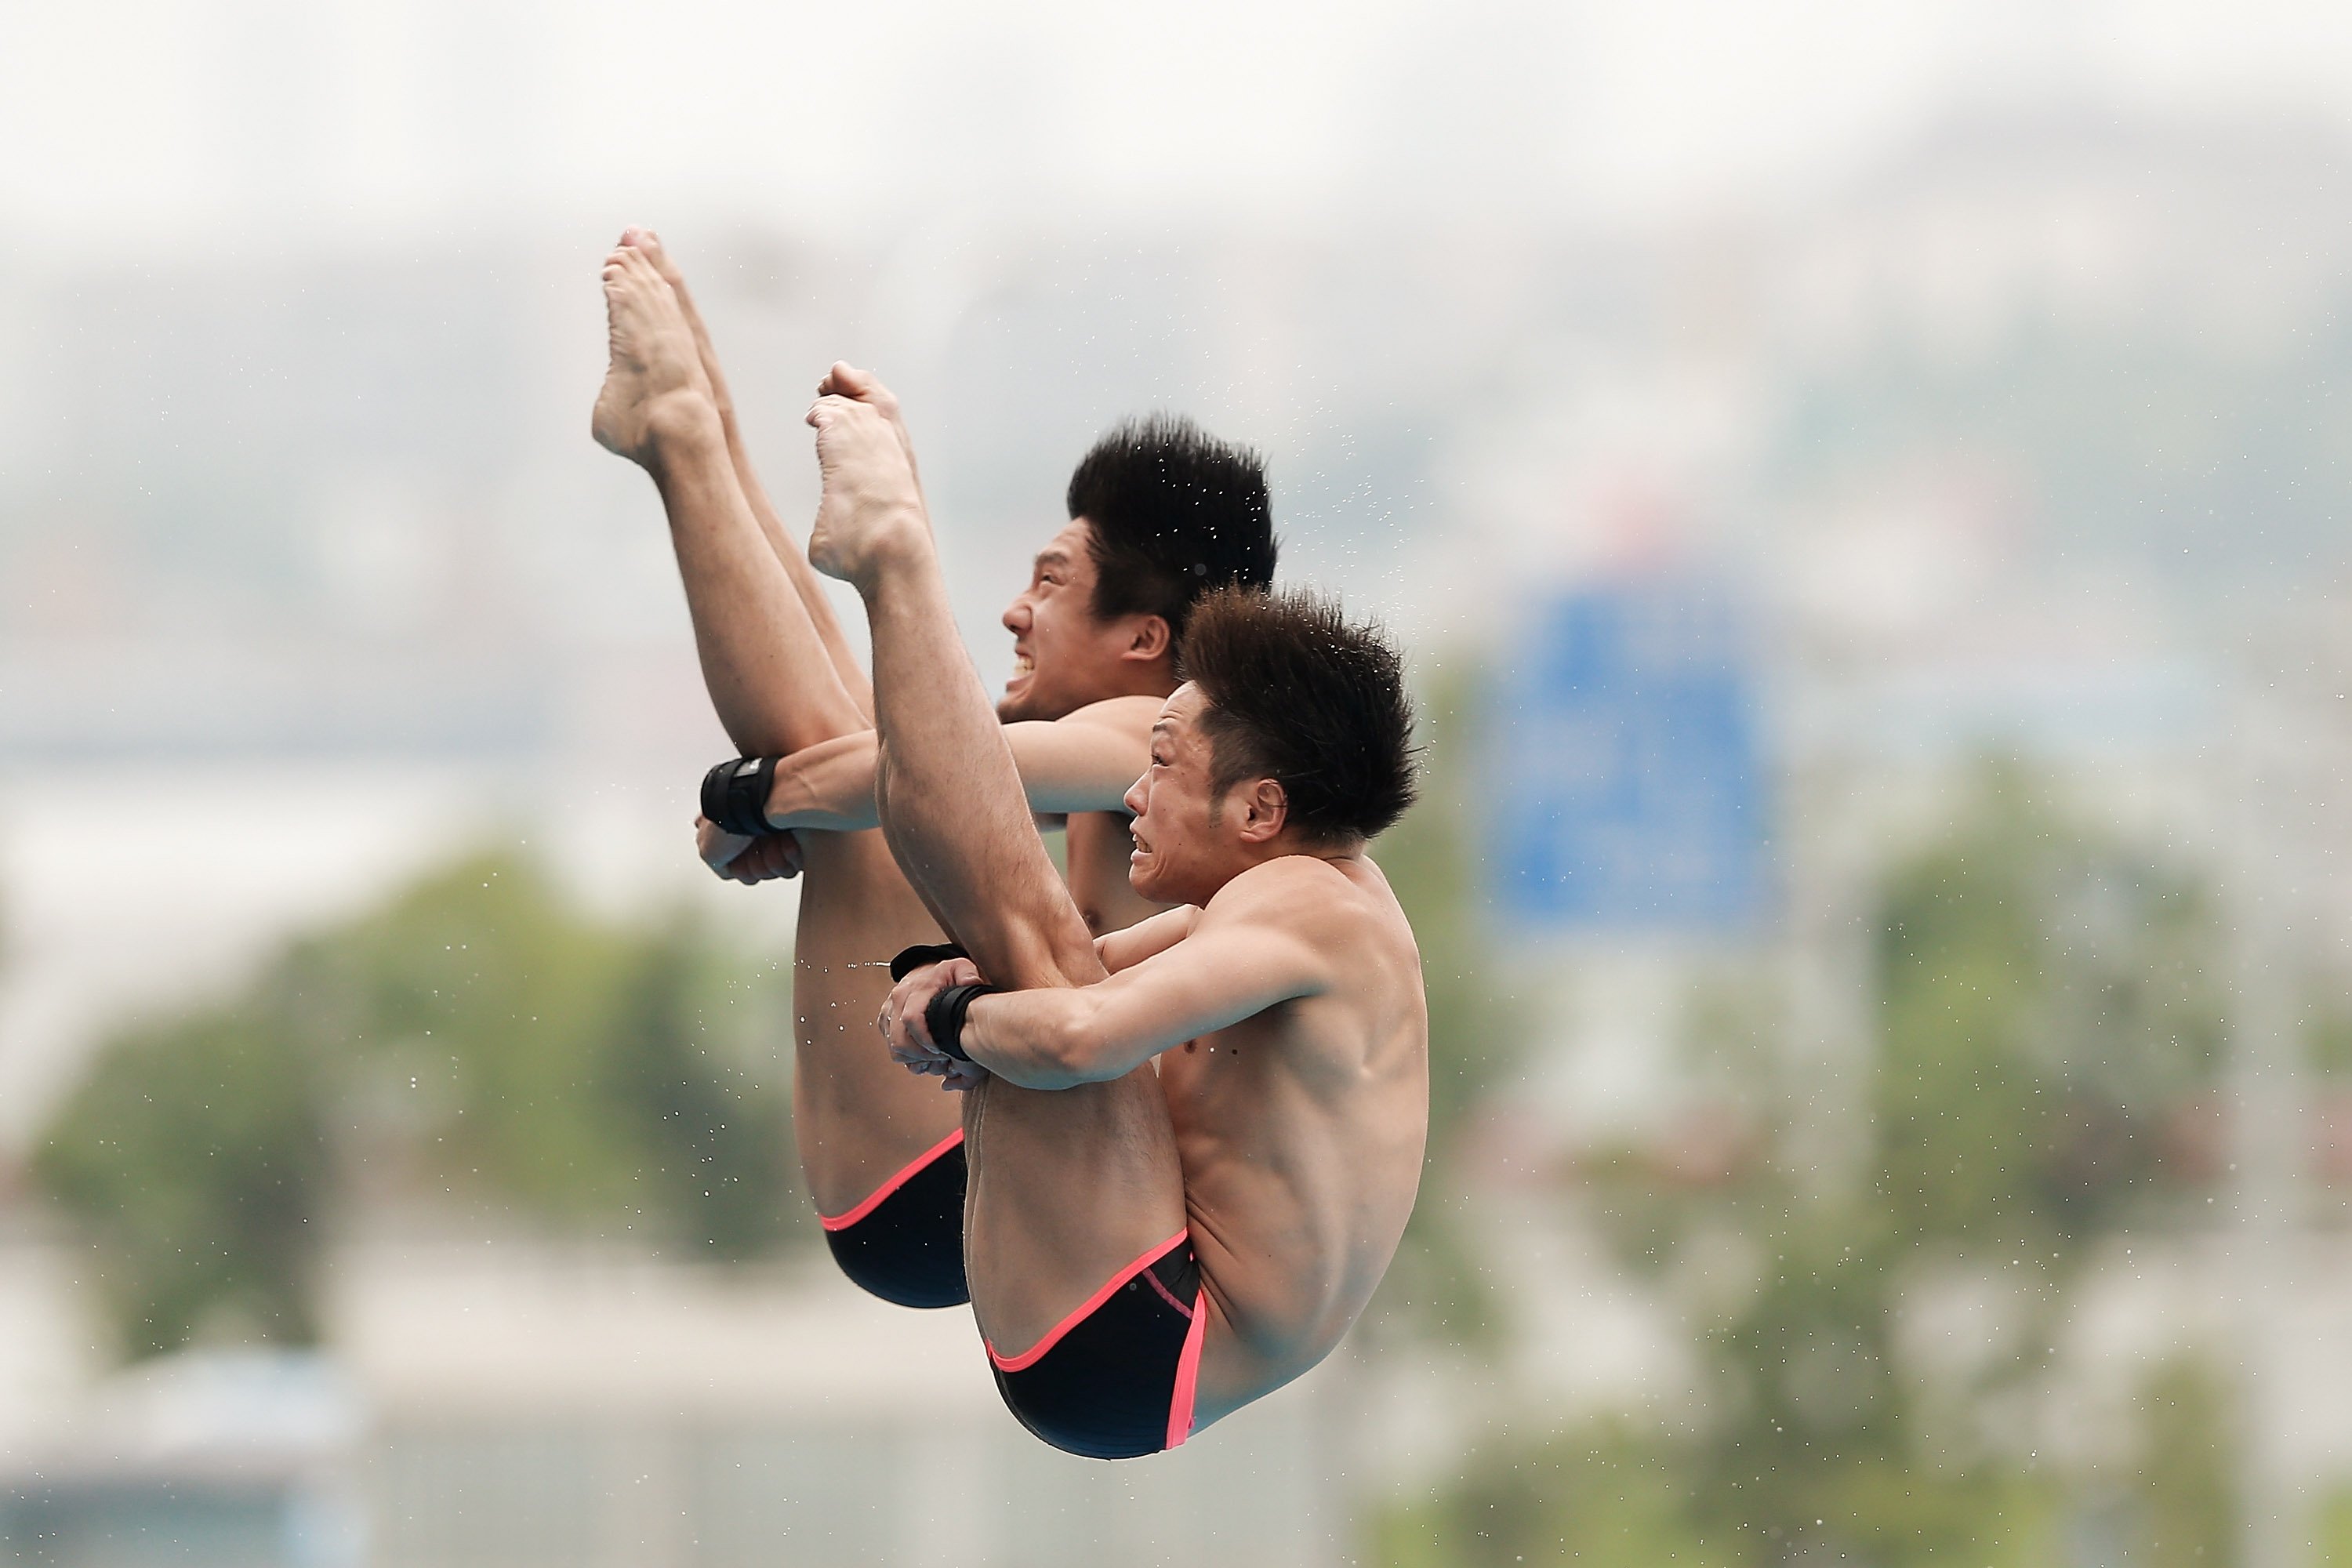 Yu Okamoto and Kazuki Murakami of Japan compete in the men's 10M Synchro Springboard Preliminary on day two of the 19th FINA Diving World Cup at the Oriental Sports Center in Shanghai on July 16, 2014.